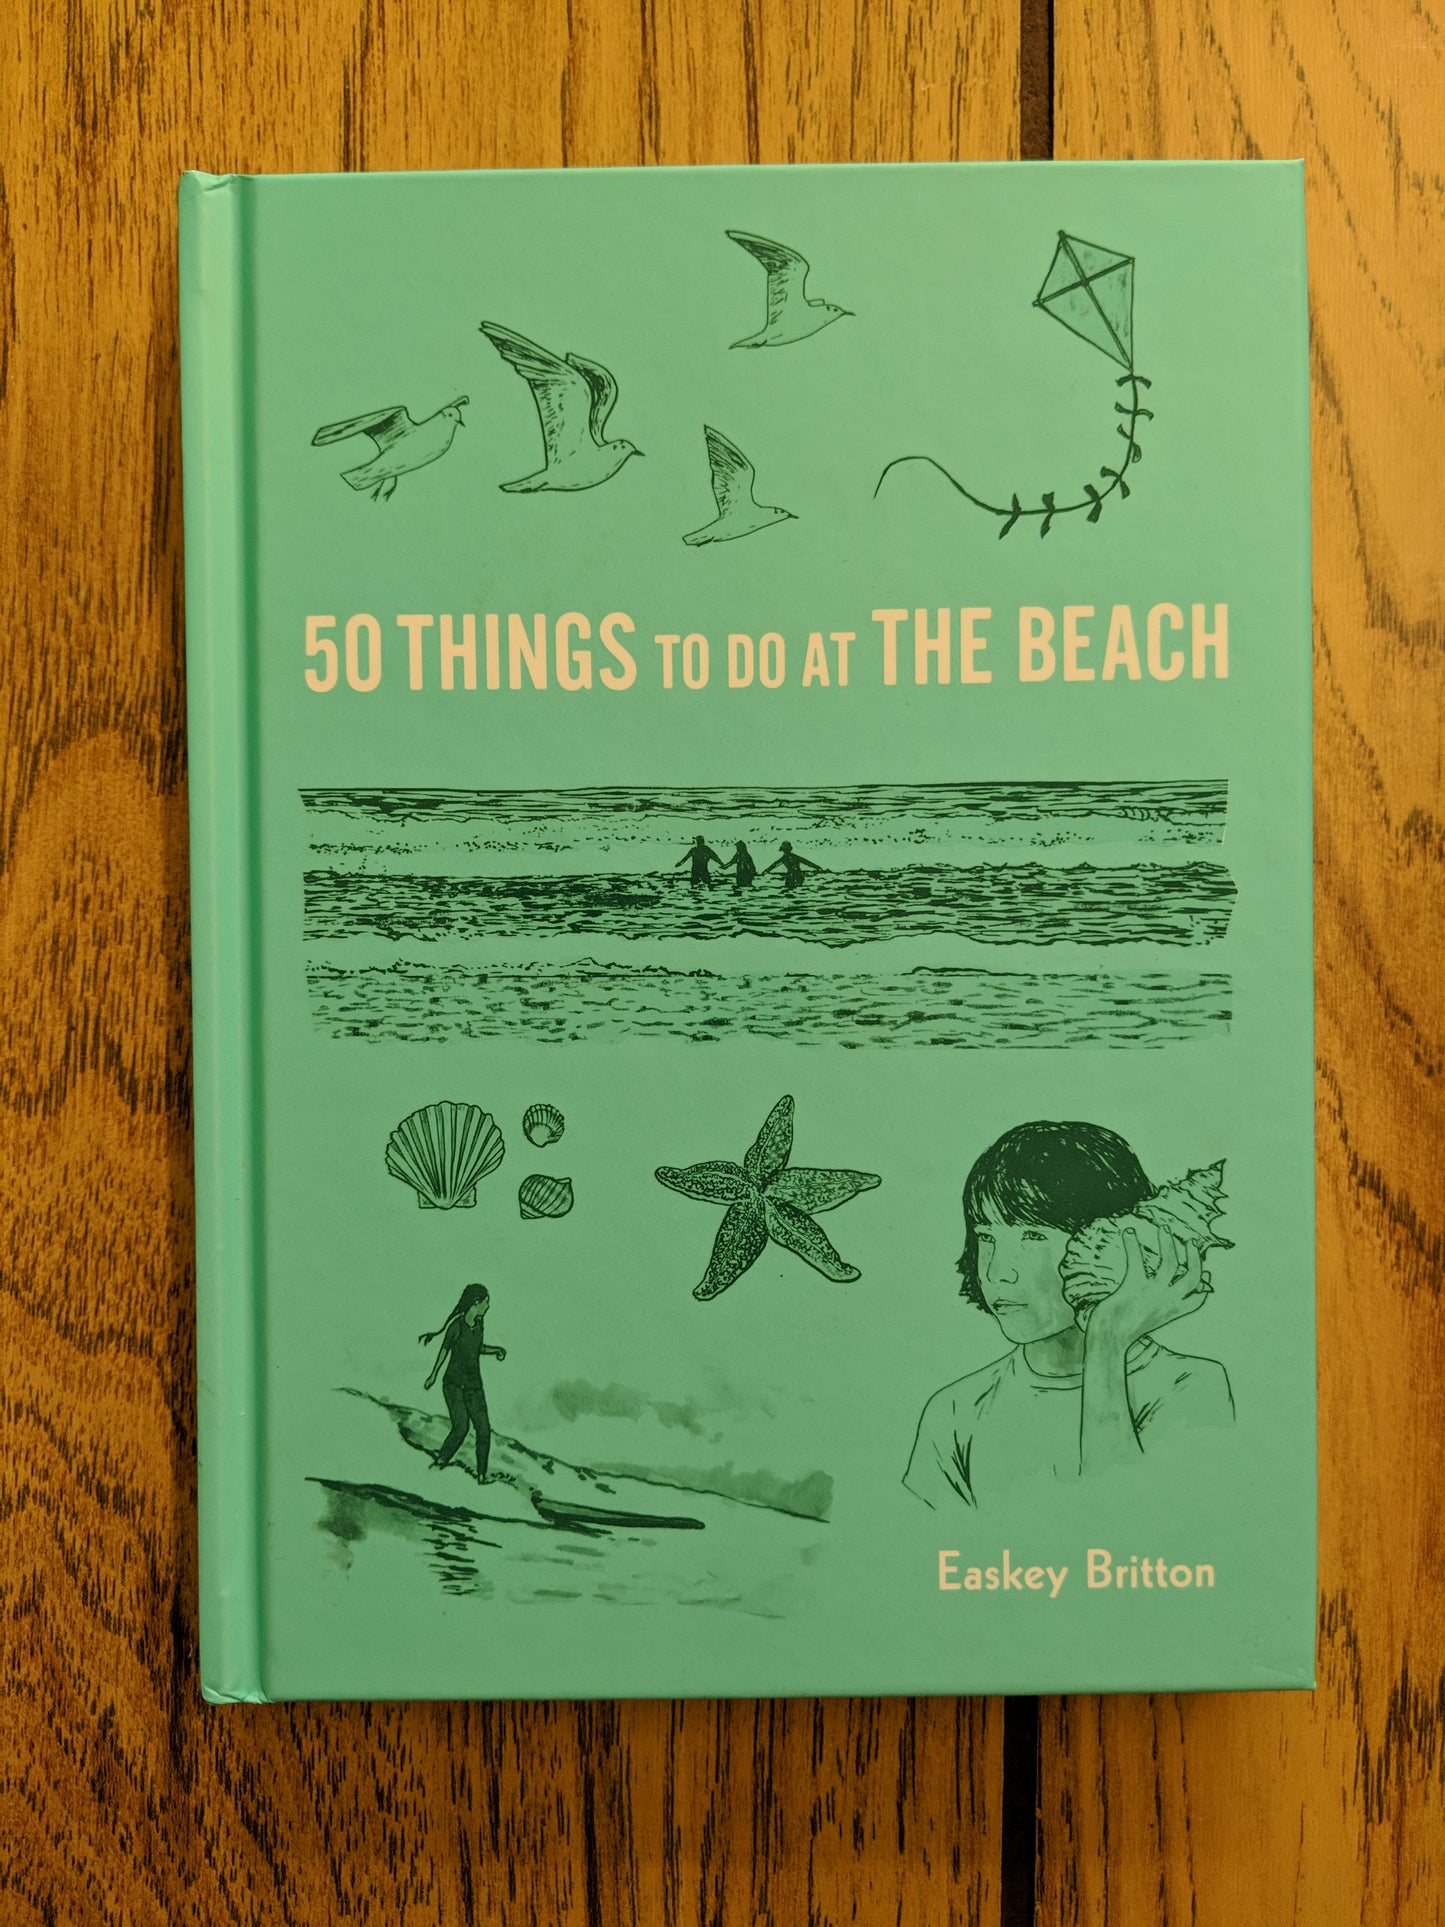 50 Things to do at The Beach